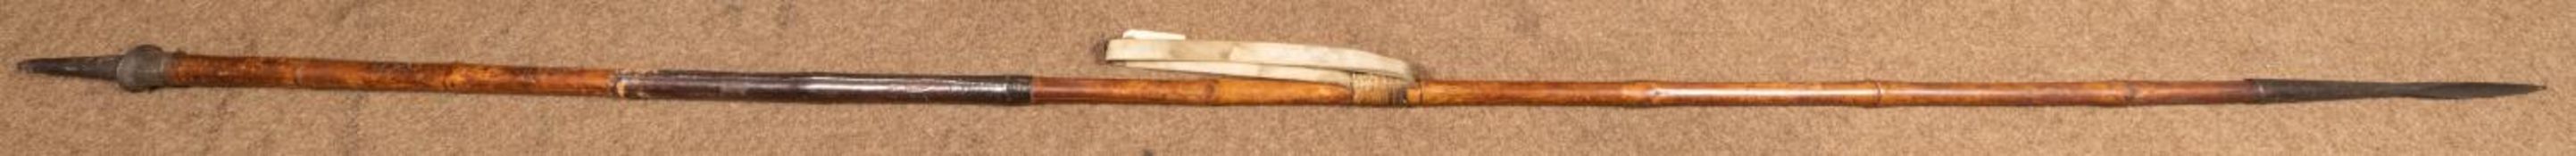 A 19th century bamboo cavalry lance, 108" (9') overall, branded "9 LRS" in several places, with